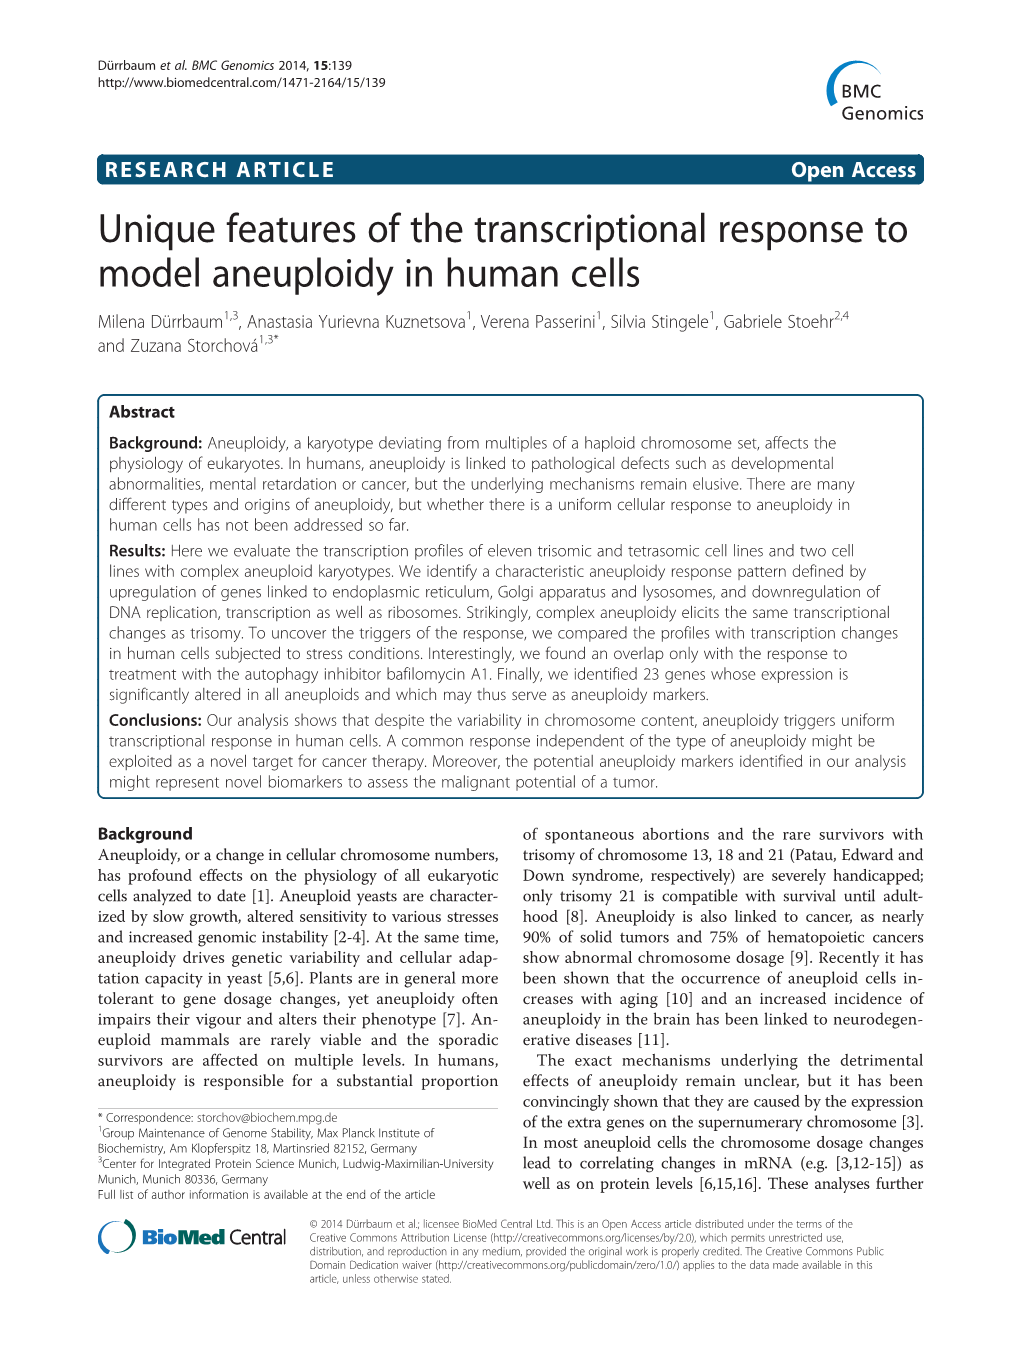 Unique Features of the Transcriptional Response to Model Aneuploidy in Human Cells